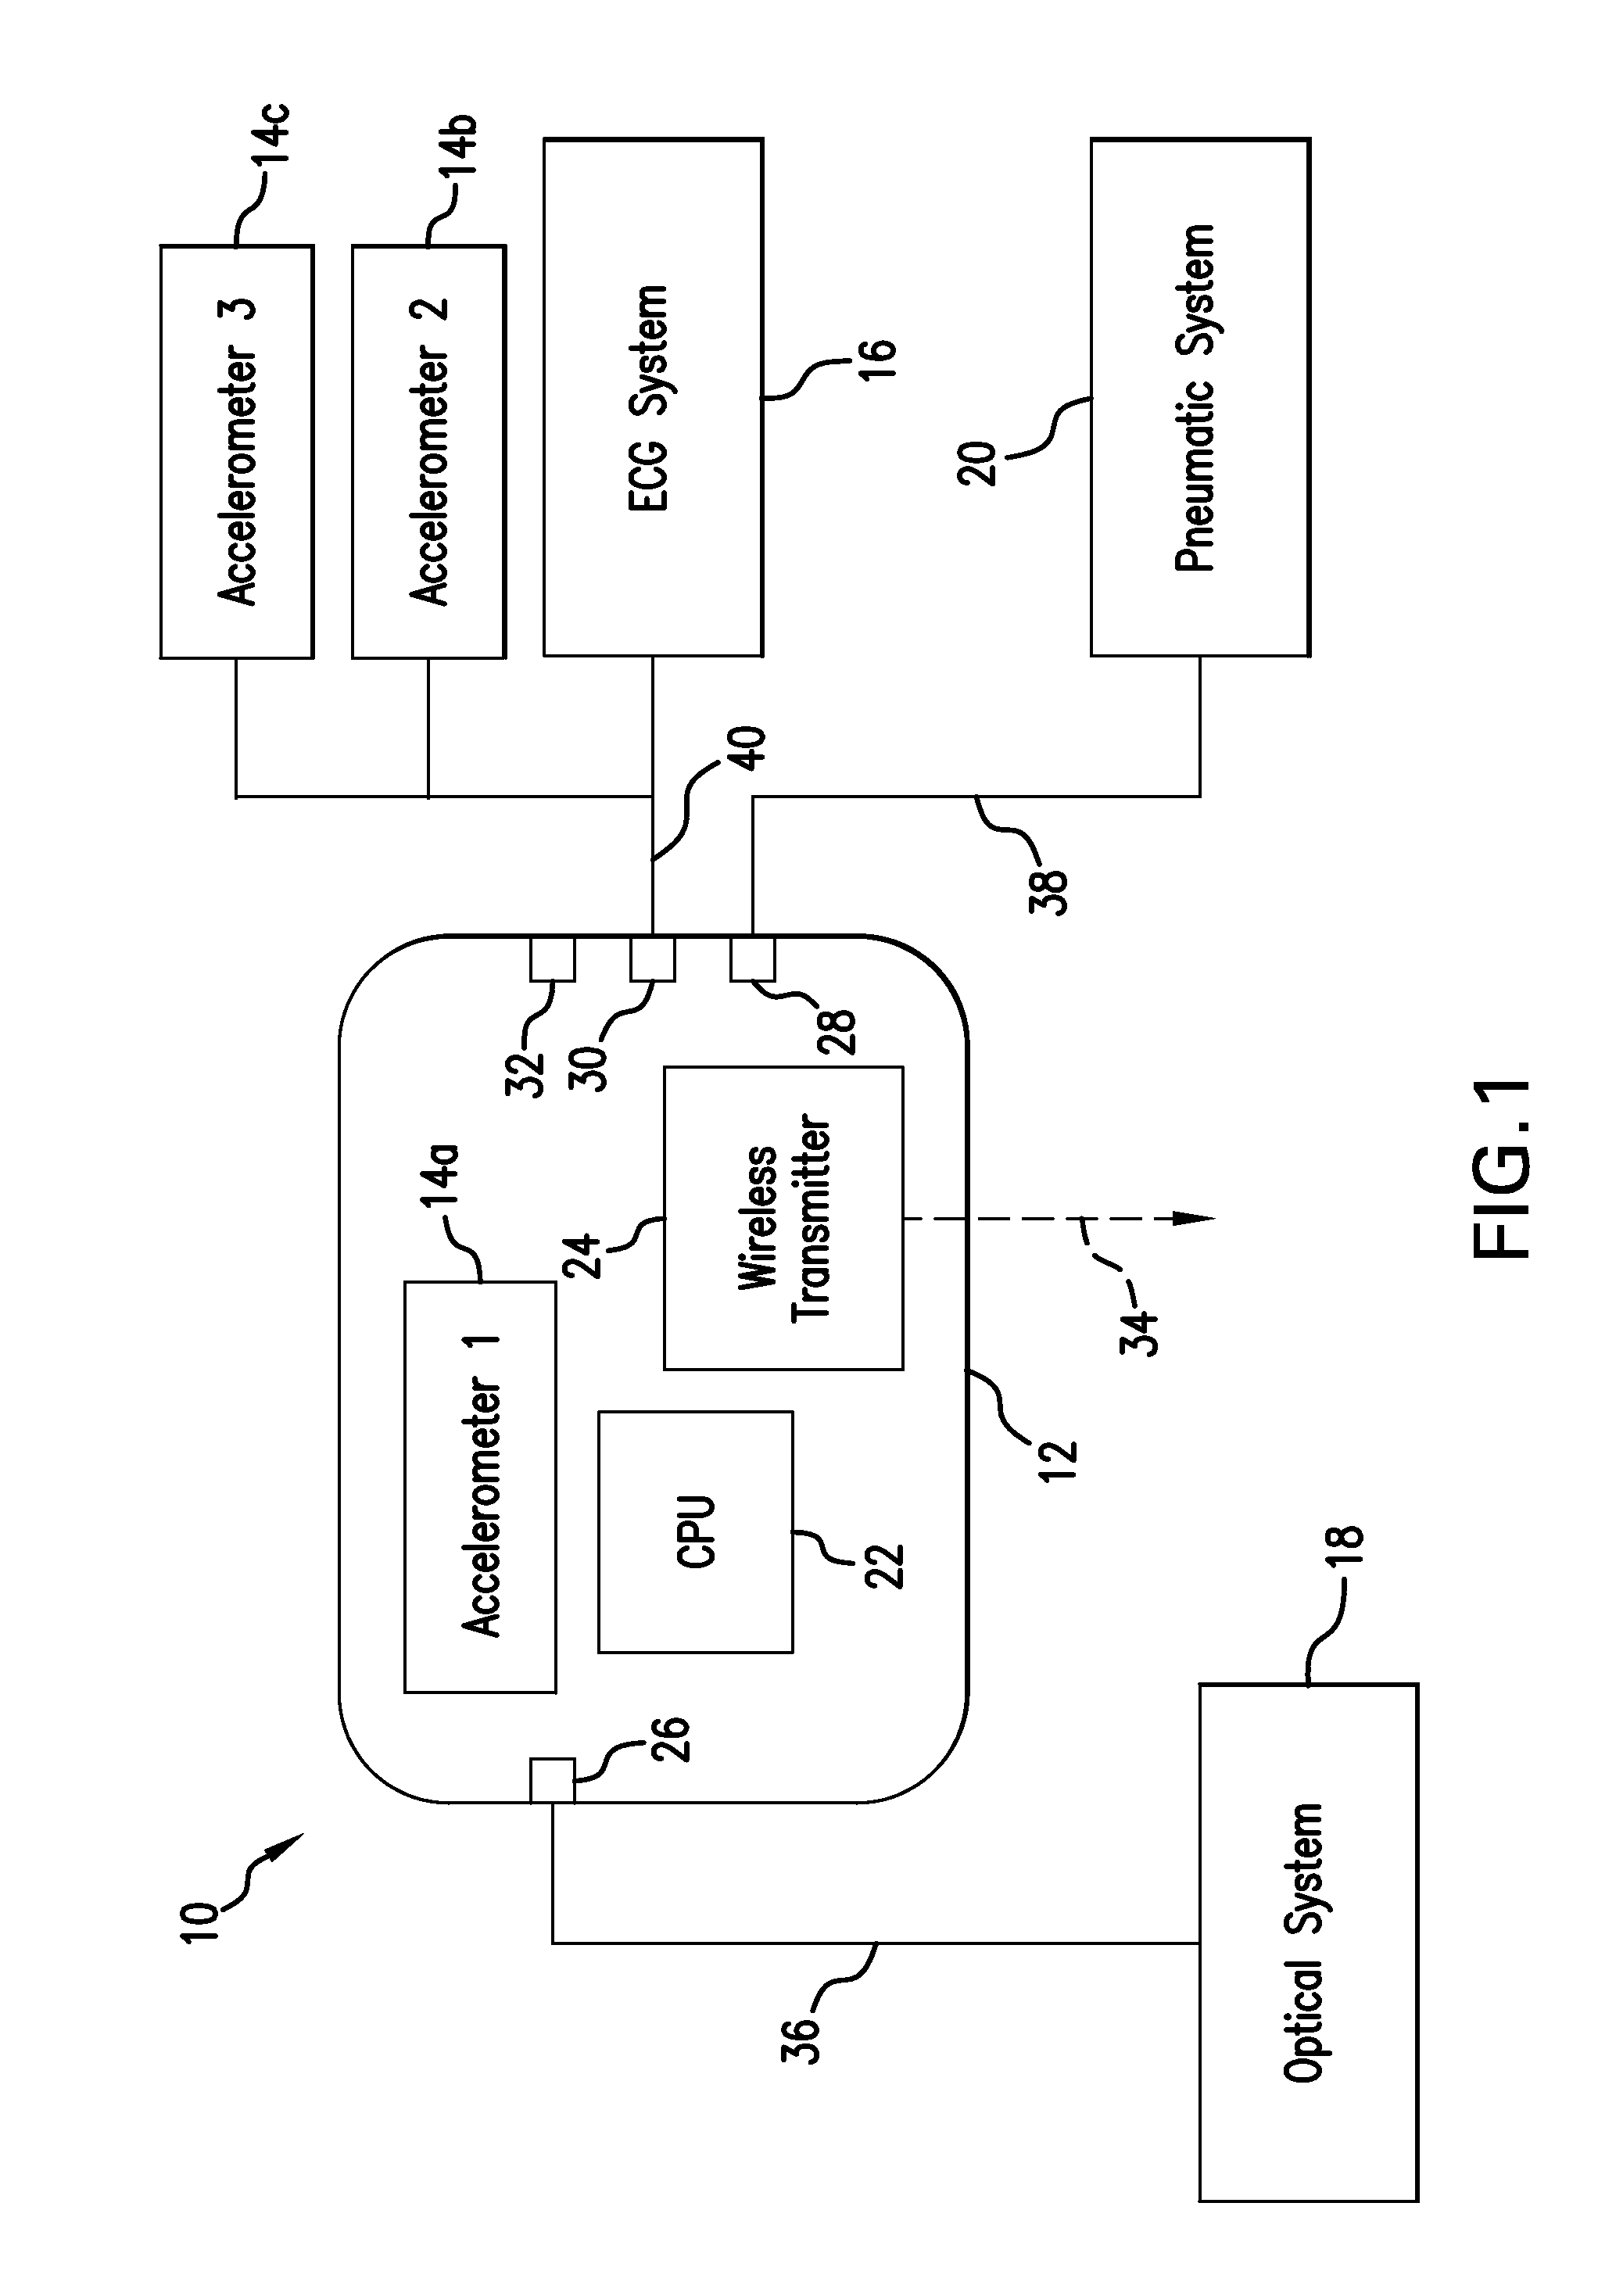 Method for measuring patient motion, activity level, and posture along with ptt-based blood pressure